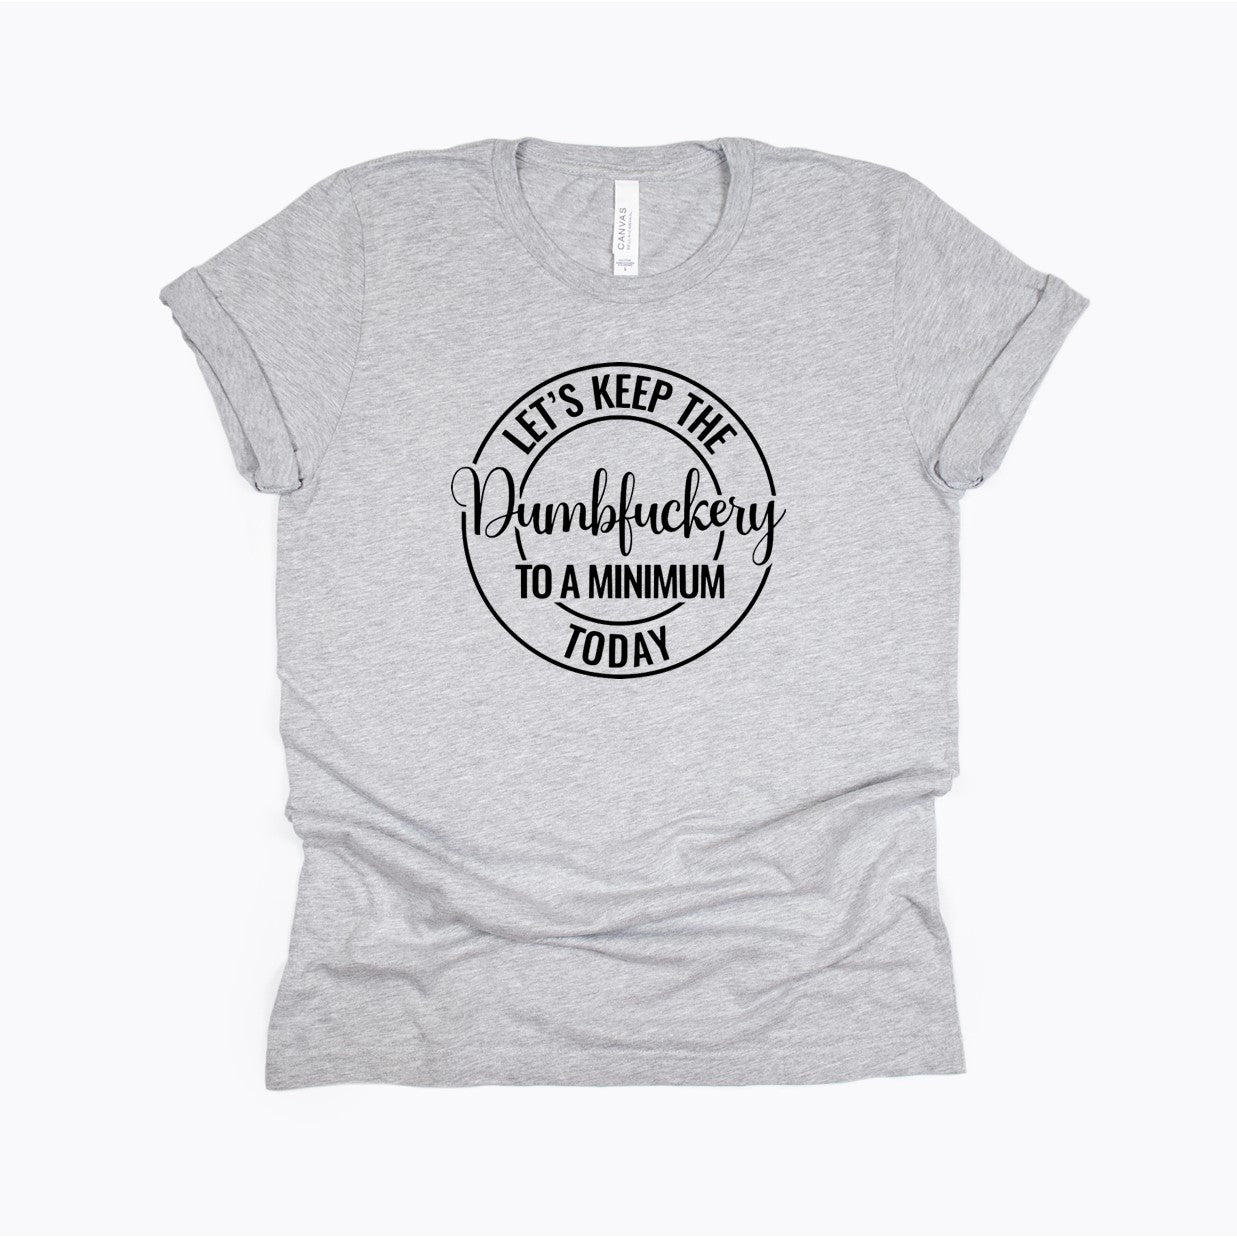 Let's keep the dumbfuckery to a minimum today - Funny work from home t-shirt